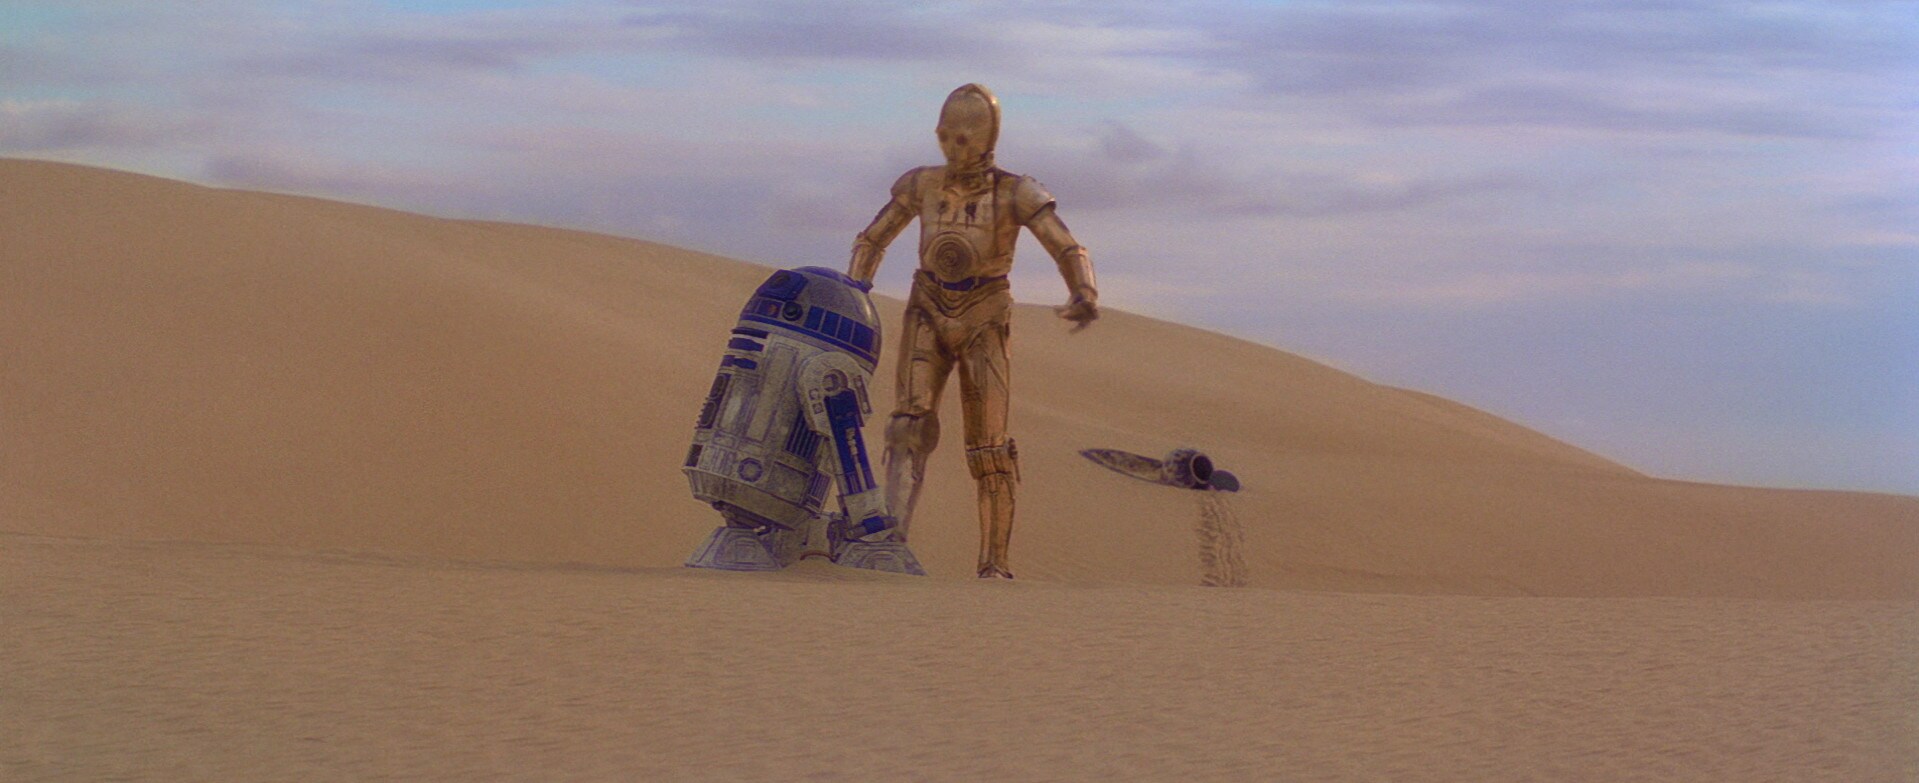 R2-D2 and C-3PO traversing the Dune Sea in 